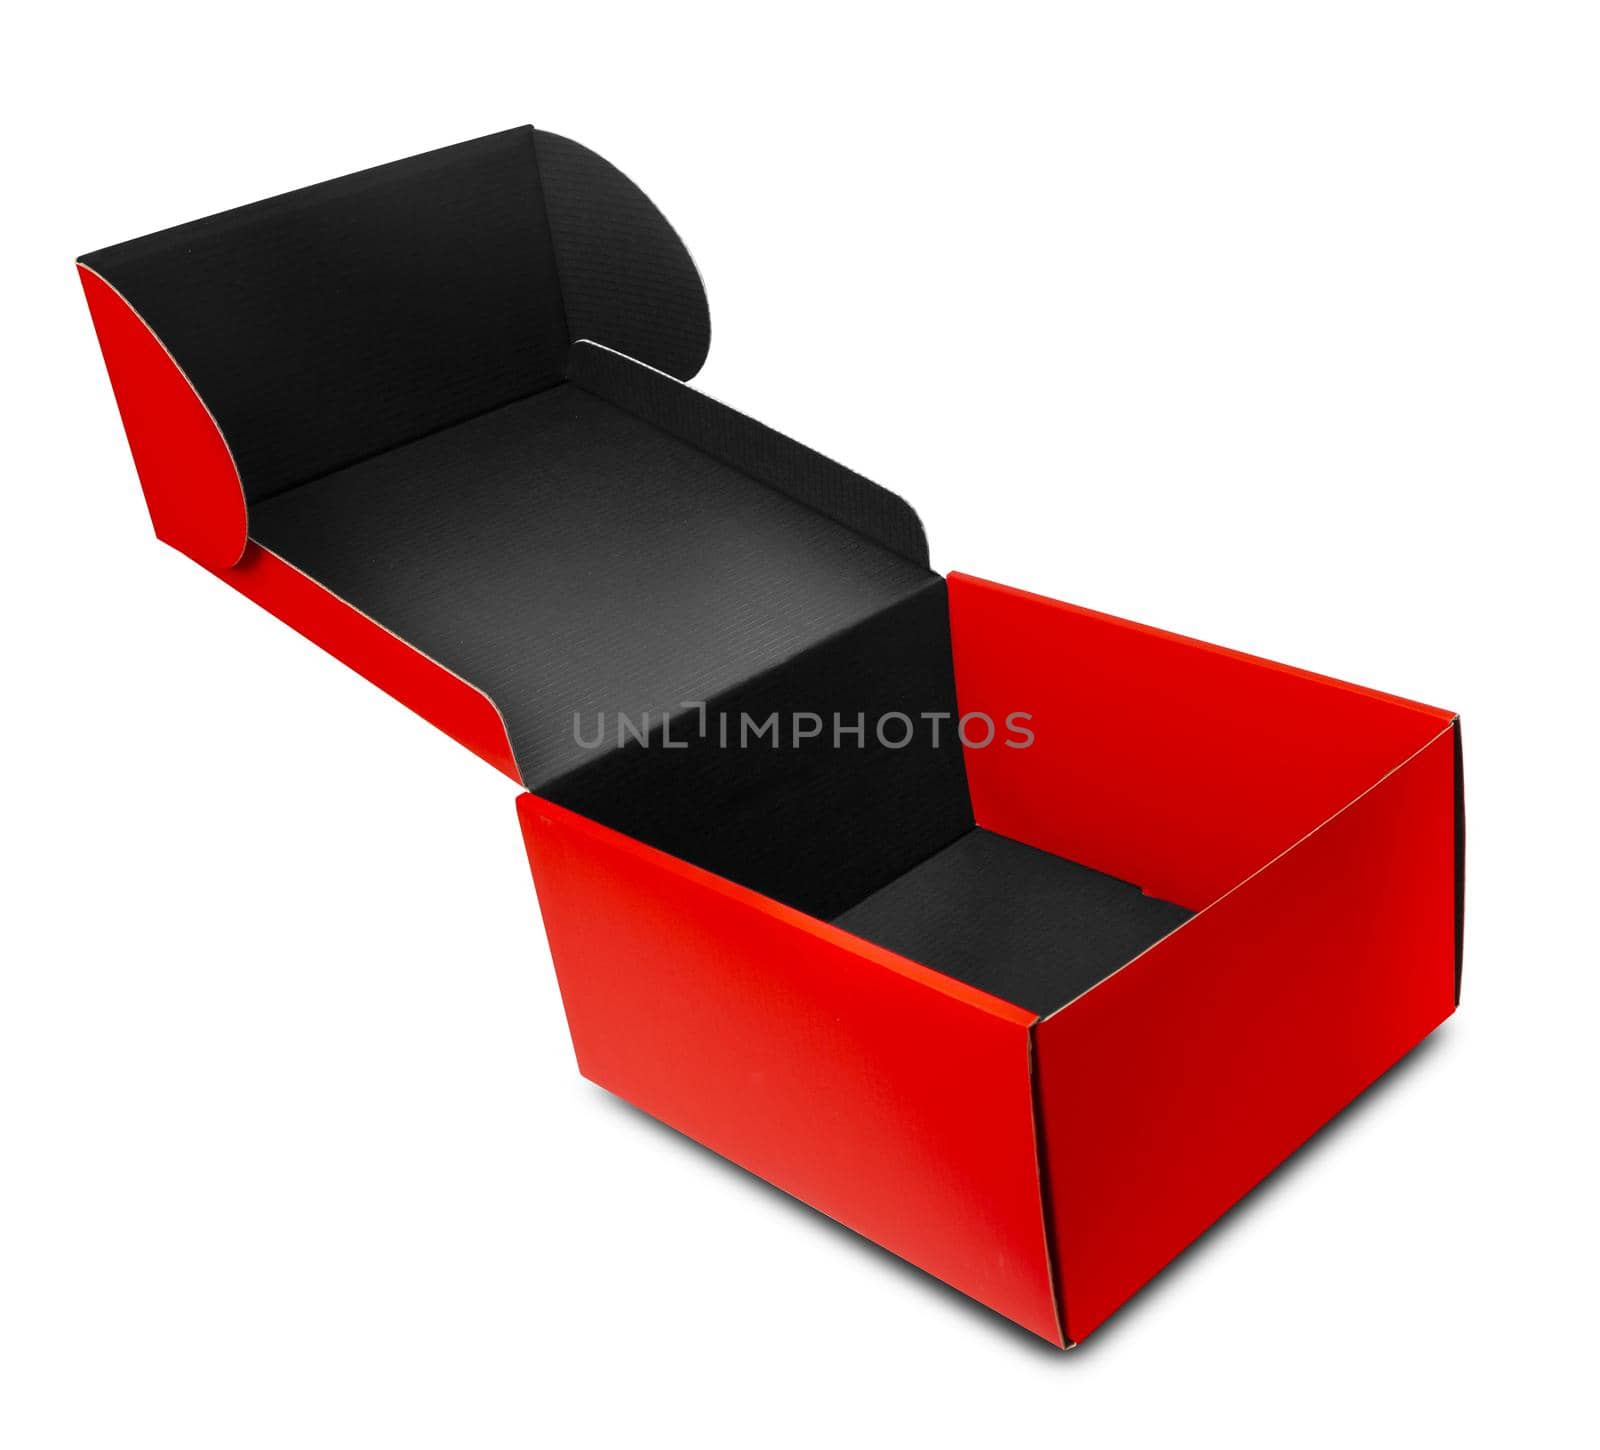 Red cardboard gift box isolated on white background by SlayCer